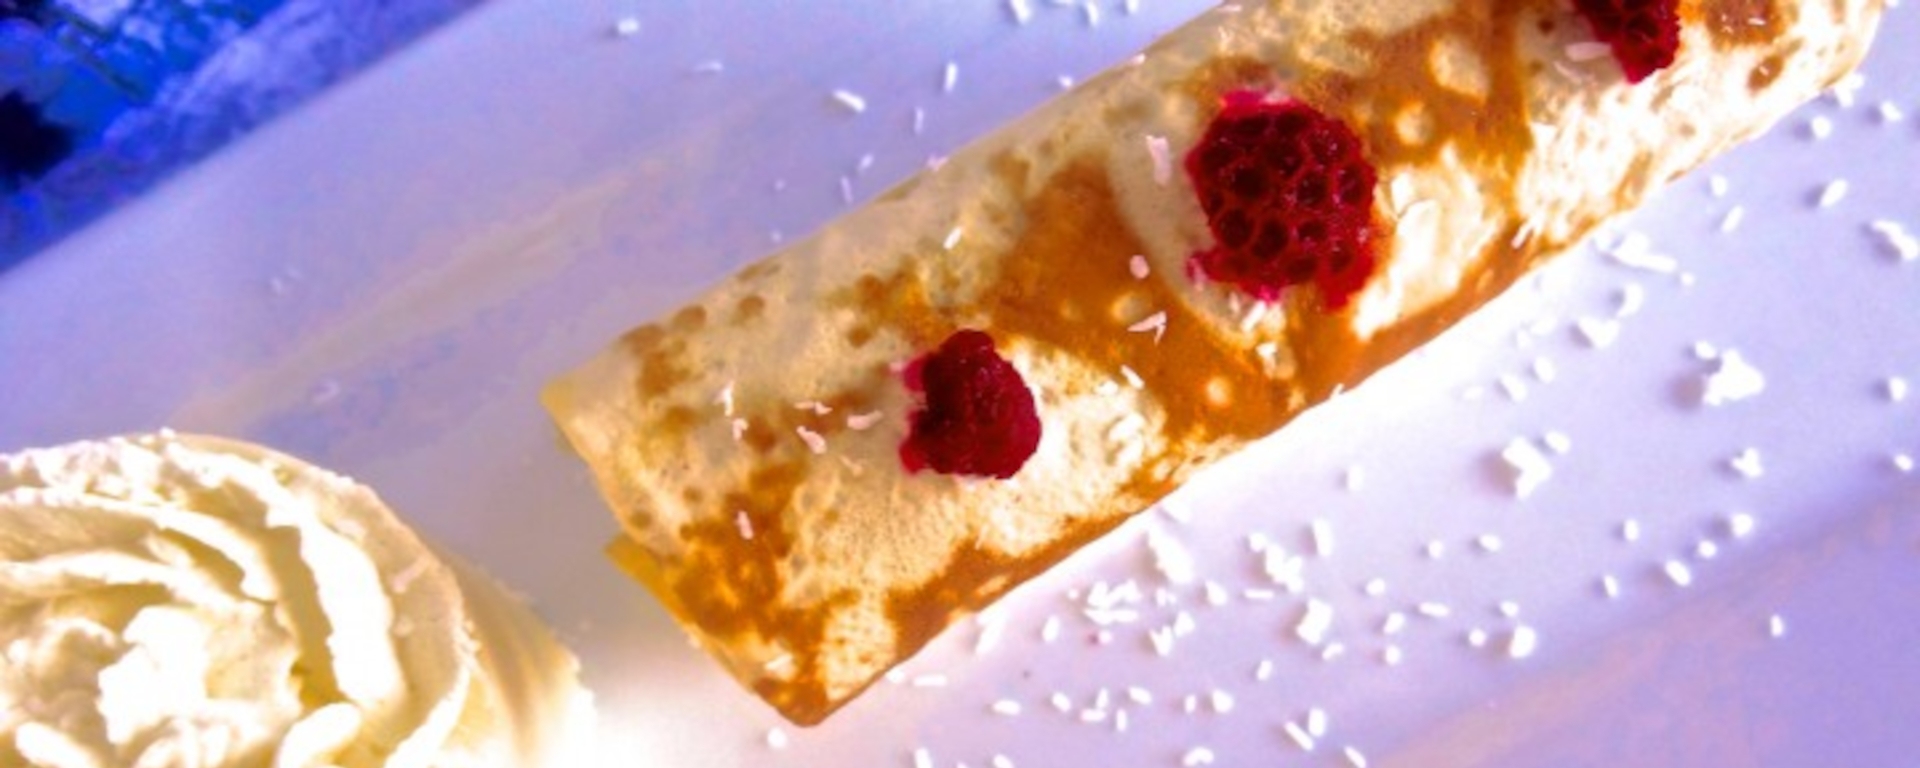 LuvMyRecipe.com - Coconut and Raspberry Crepes Featured